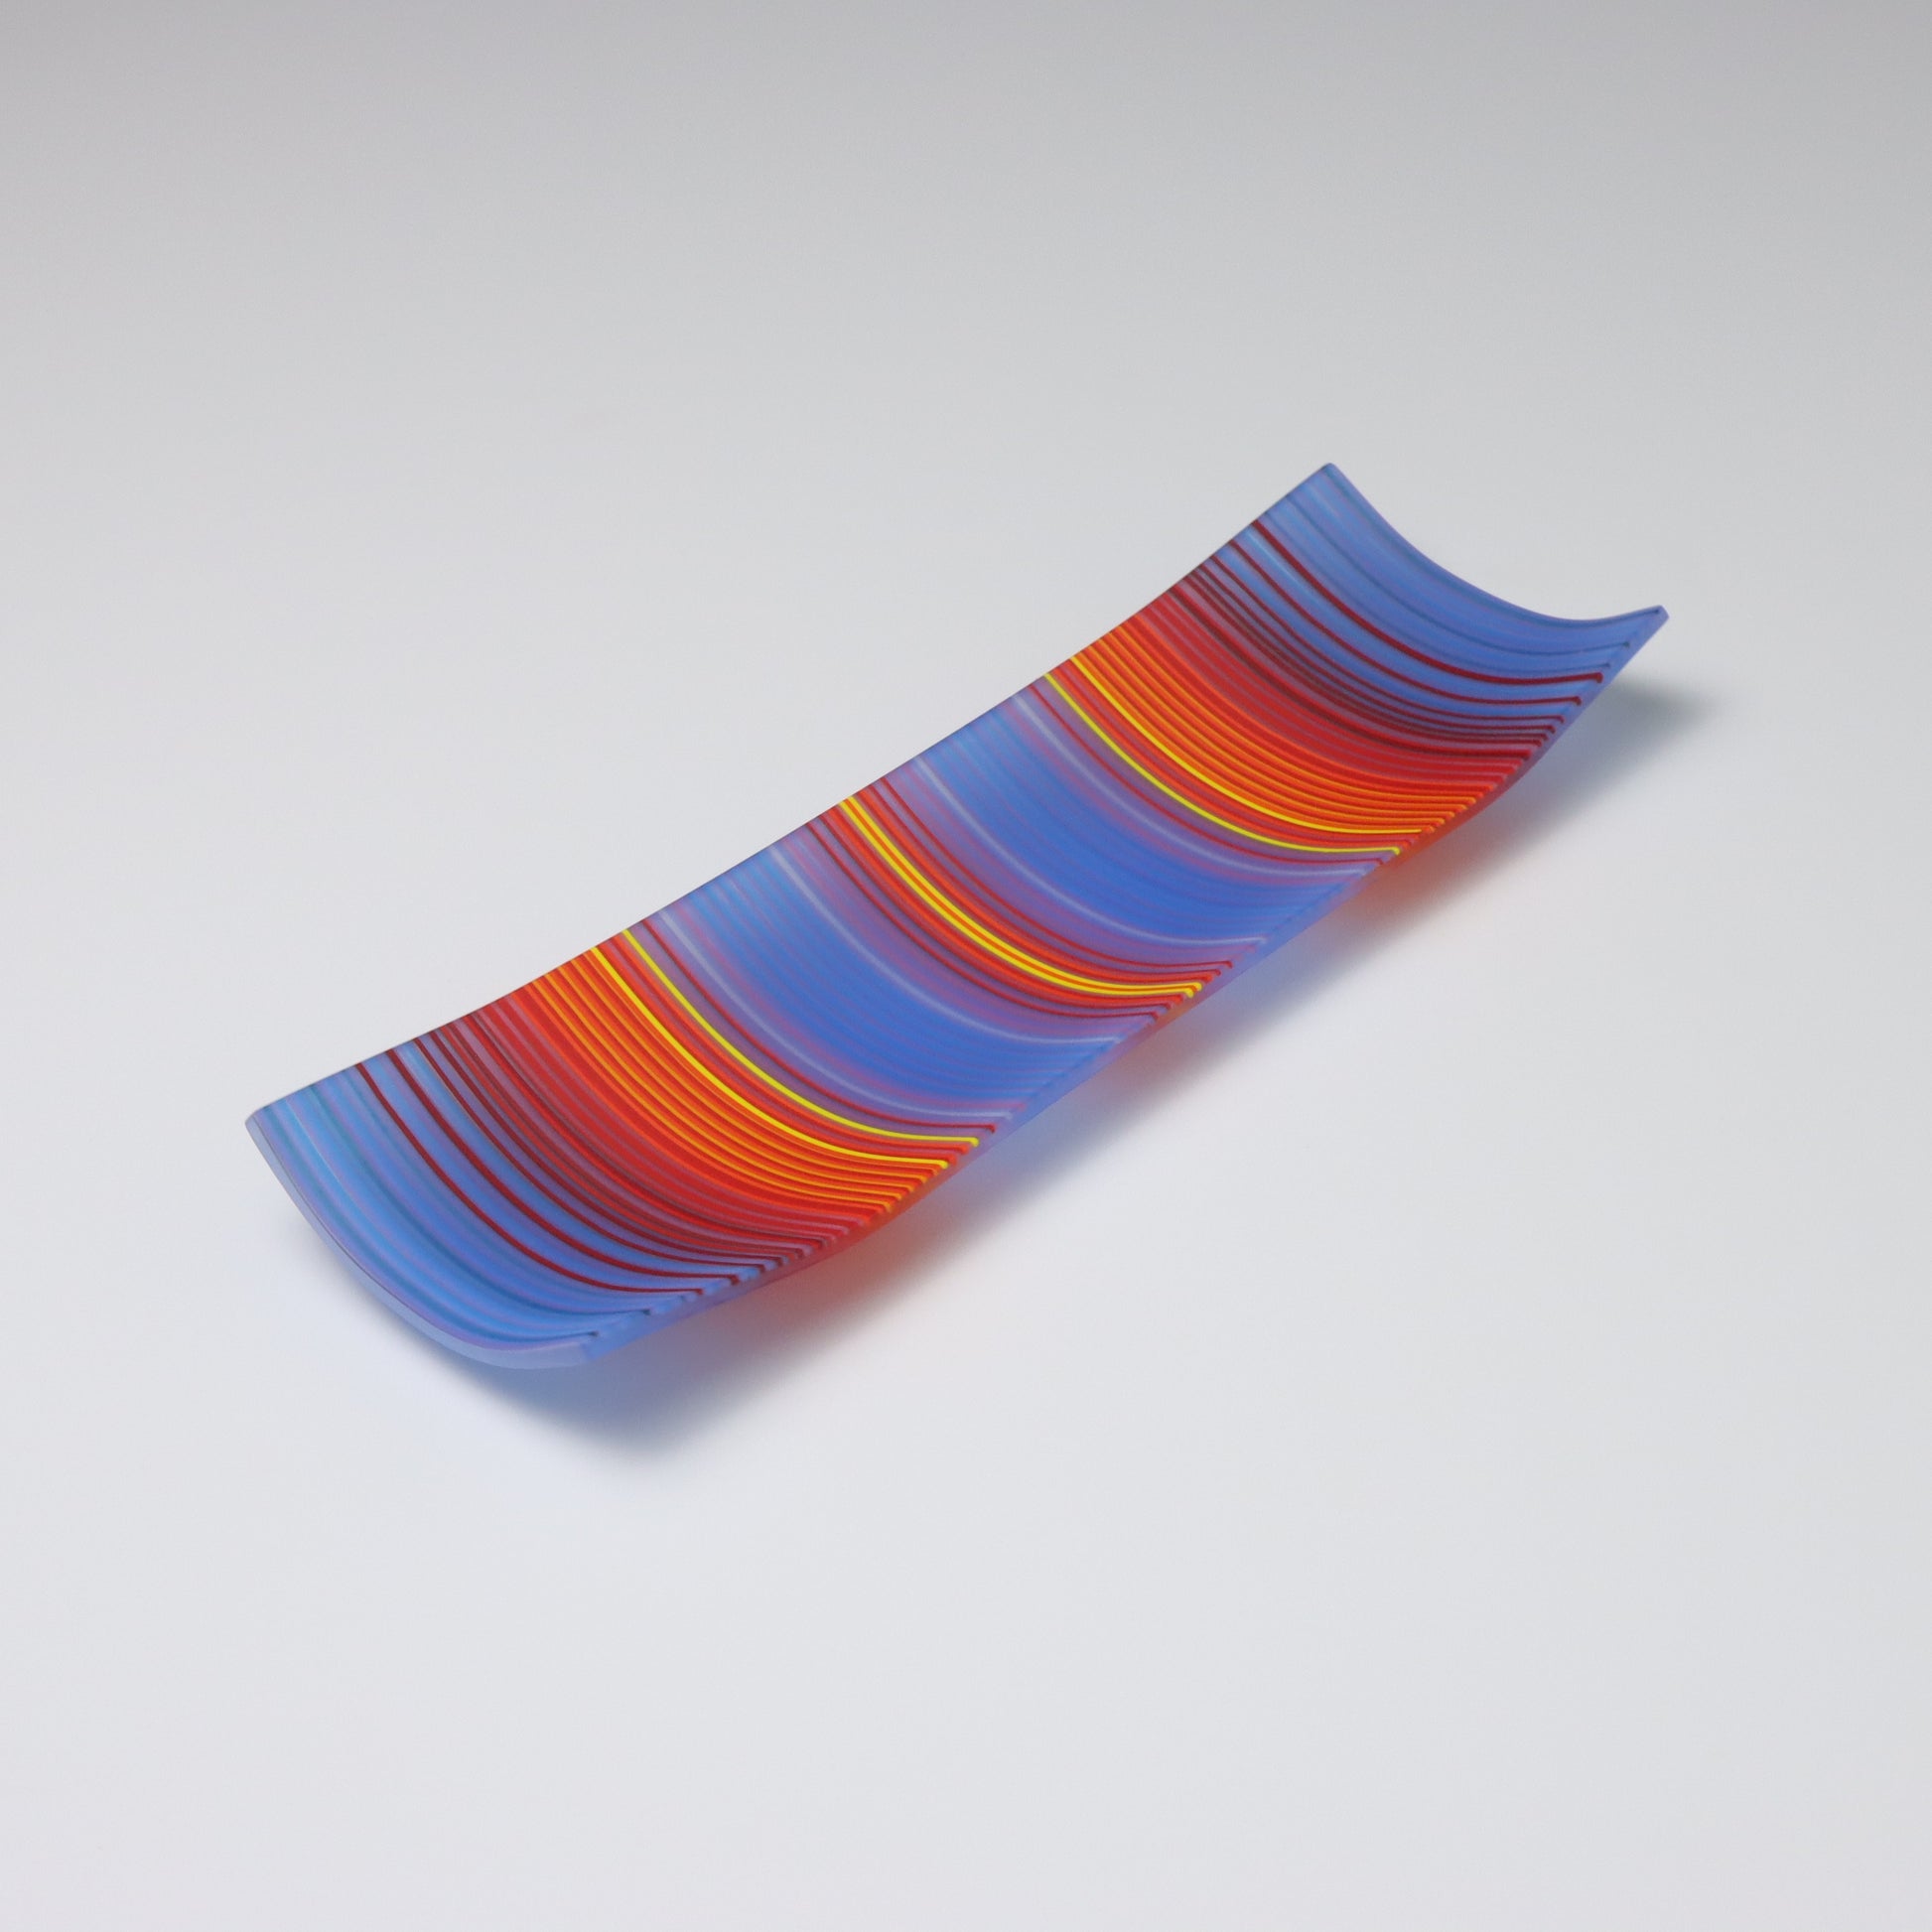 A decorative shallow rectangular boat shaped glass plate with raised corners and a  colourful ColourWave stripe patterns showing key colours of bold blue, red, orange and yellow.